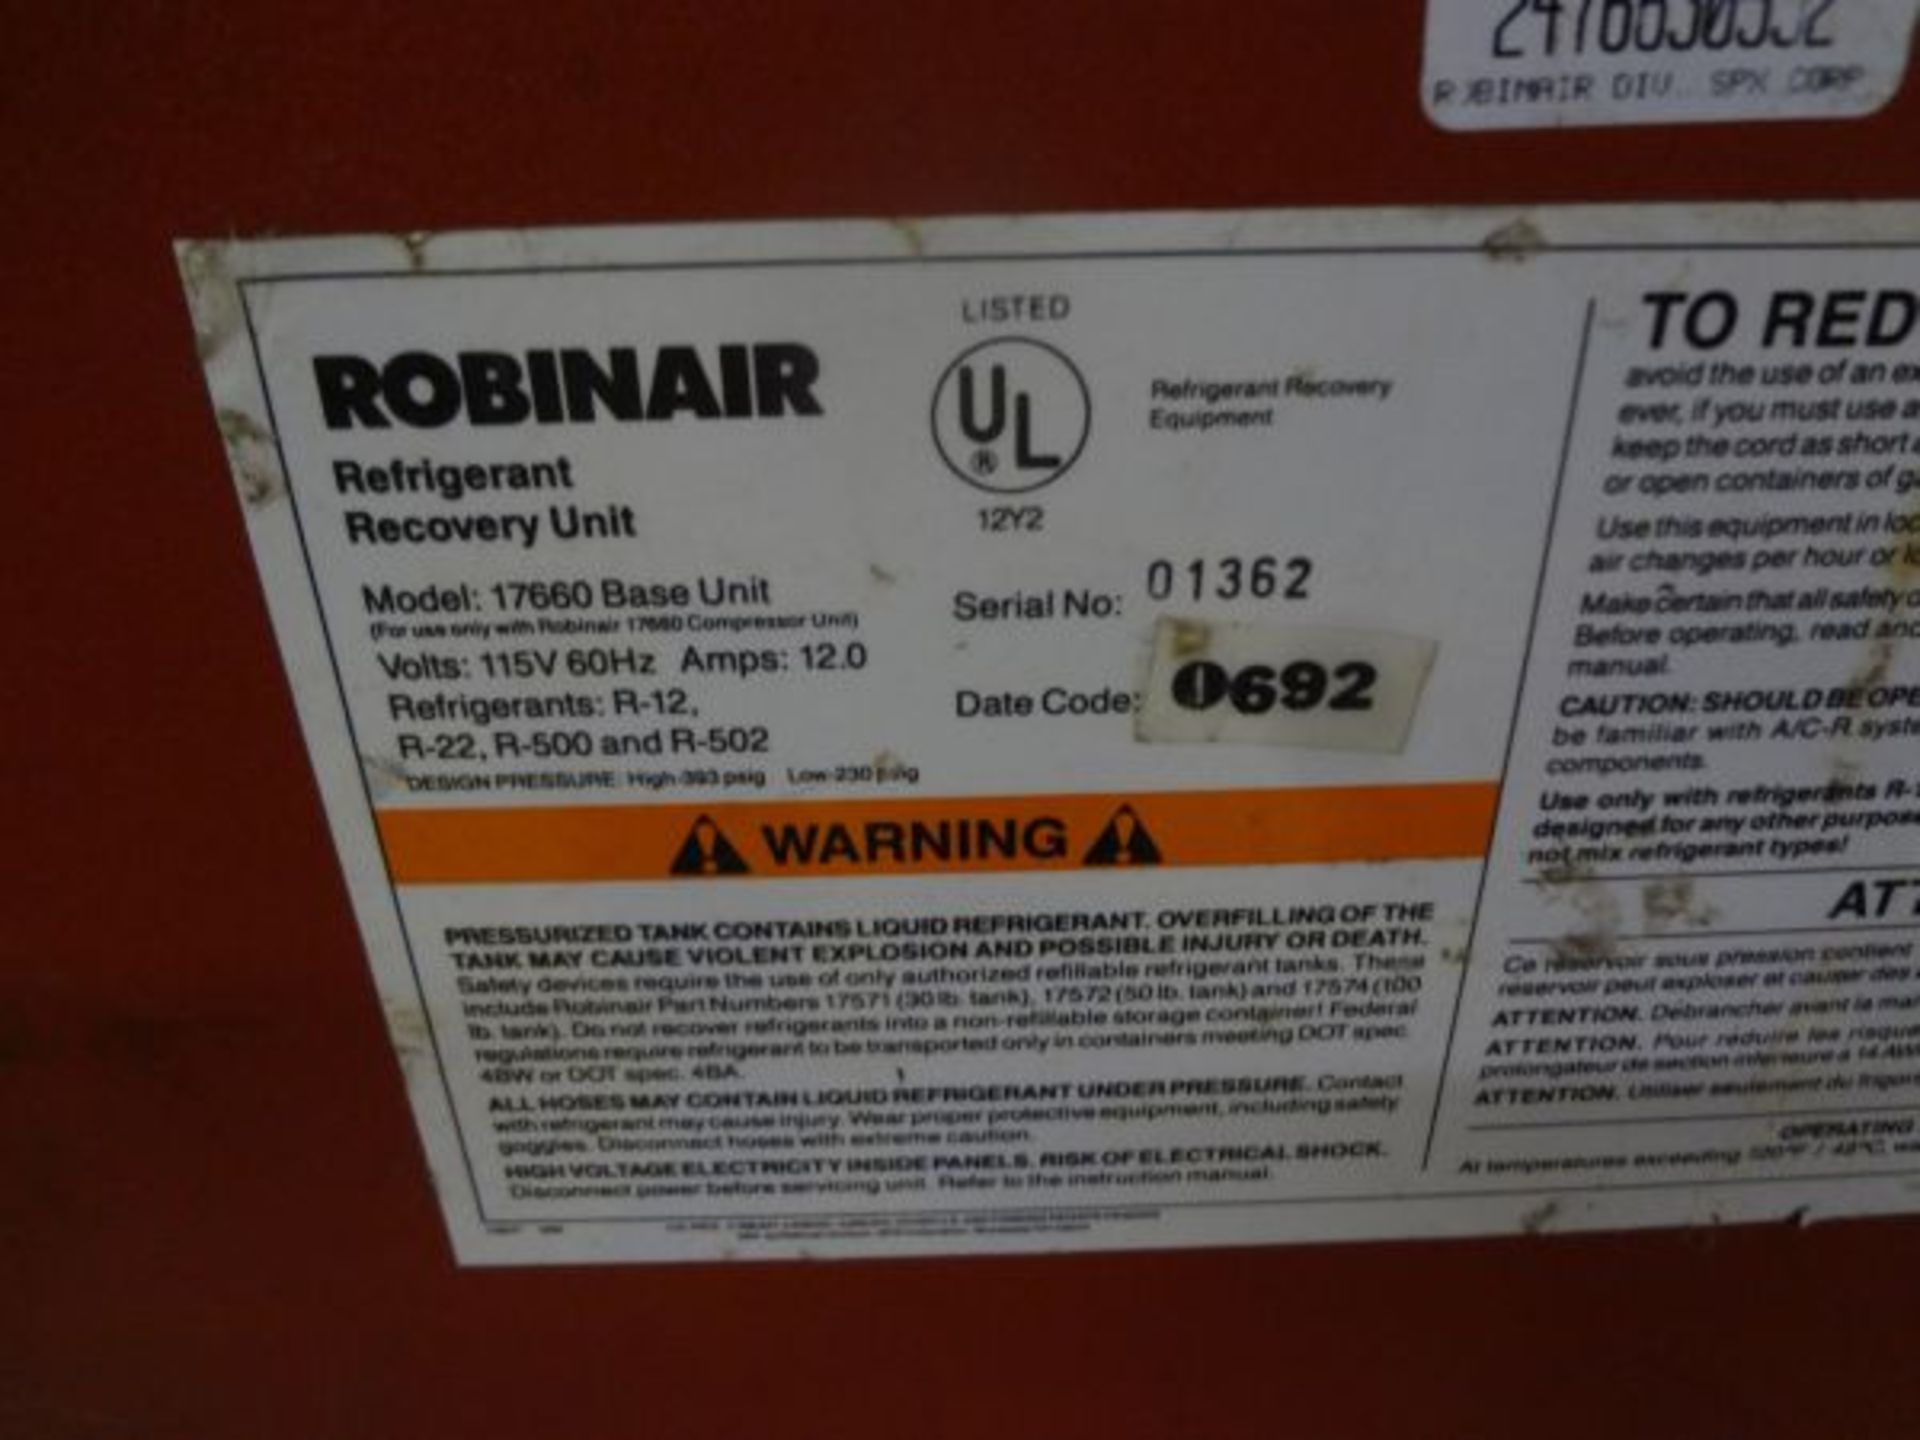 ROBINAIR MODEL 17660 REFRIGERANT RECOVERY SYSTEM - Image 3 of 3